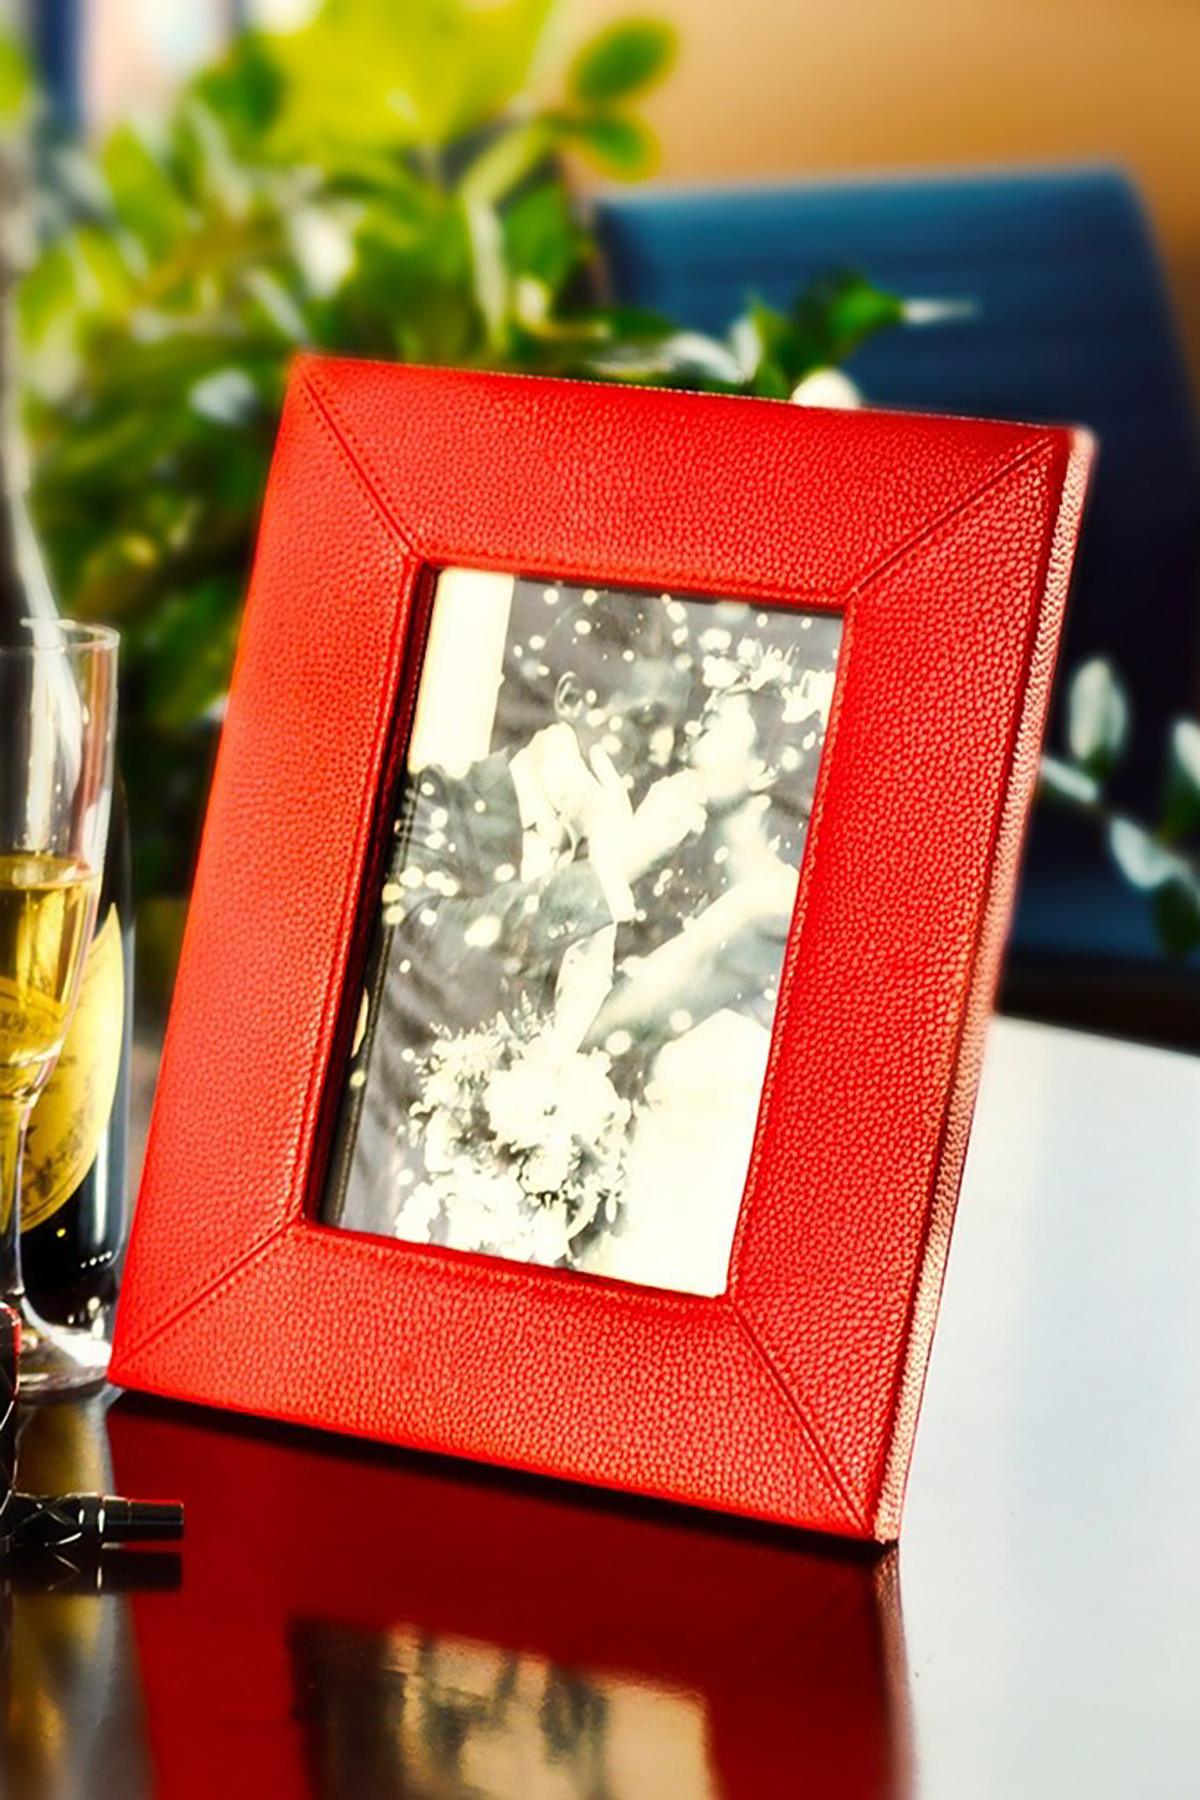 Campo Marzio Cherry-Red Pebbled Faux-Leather Picture Frame